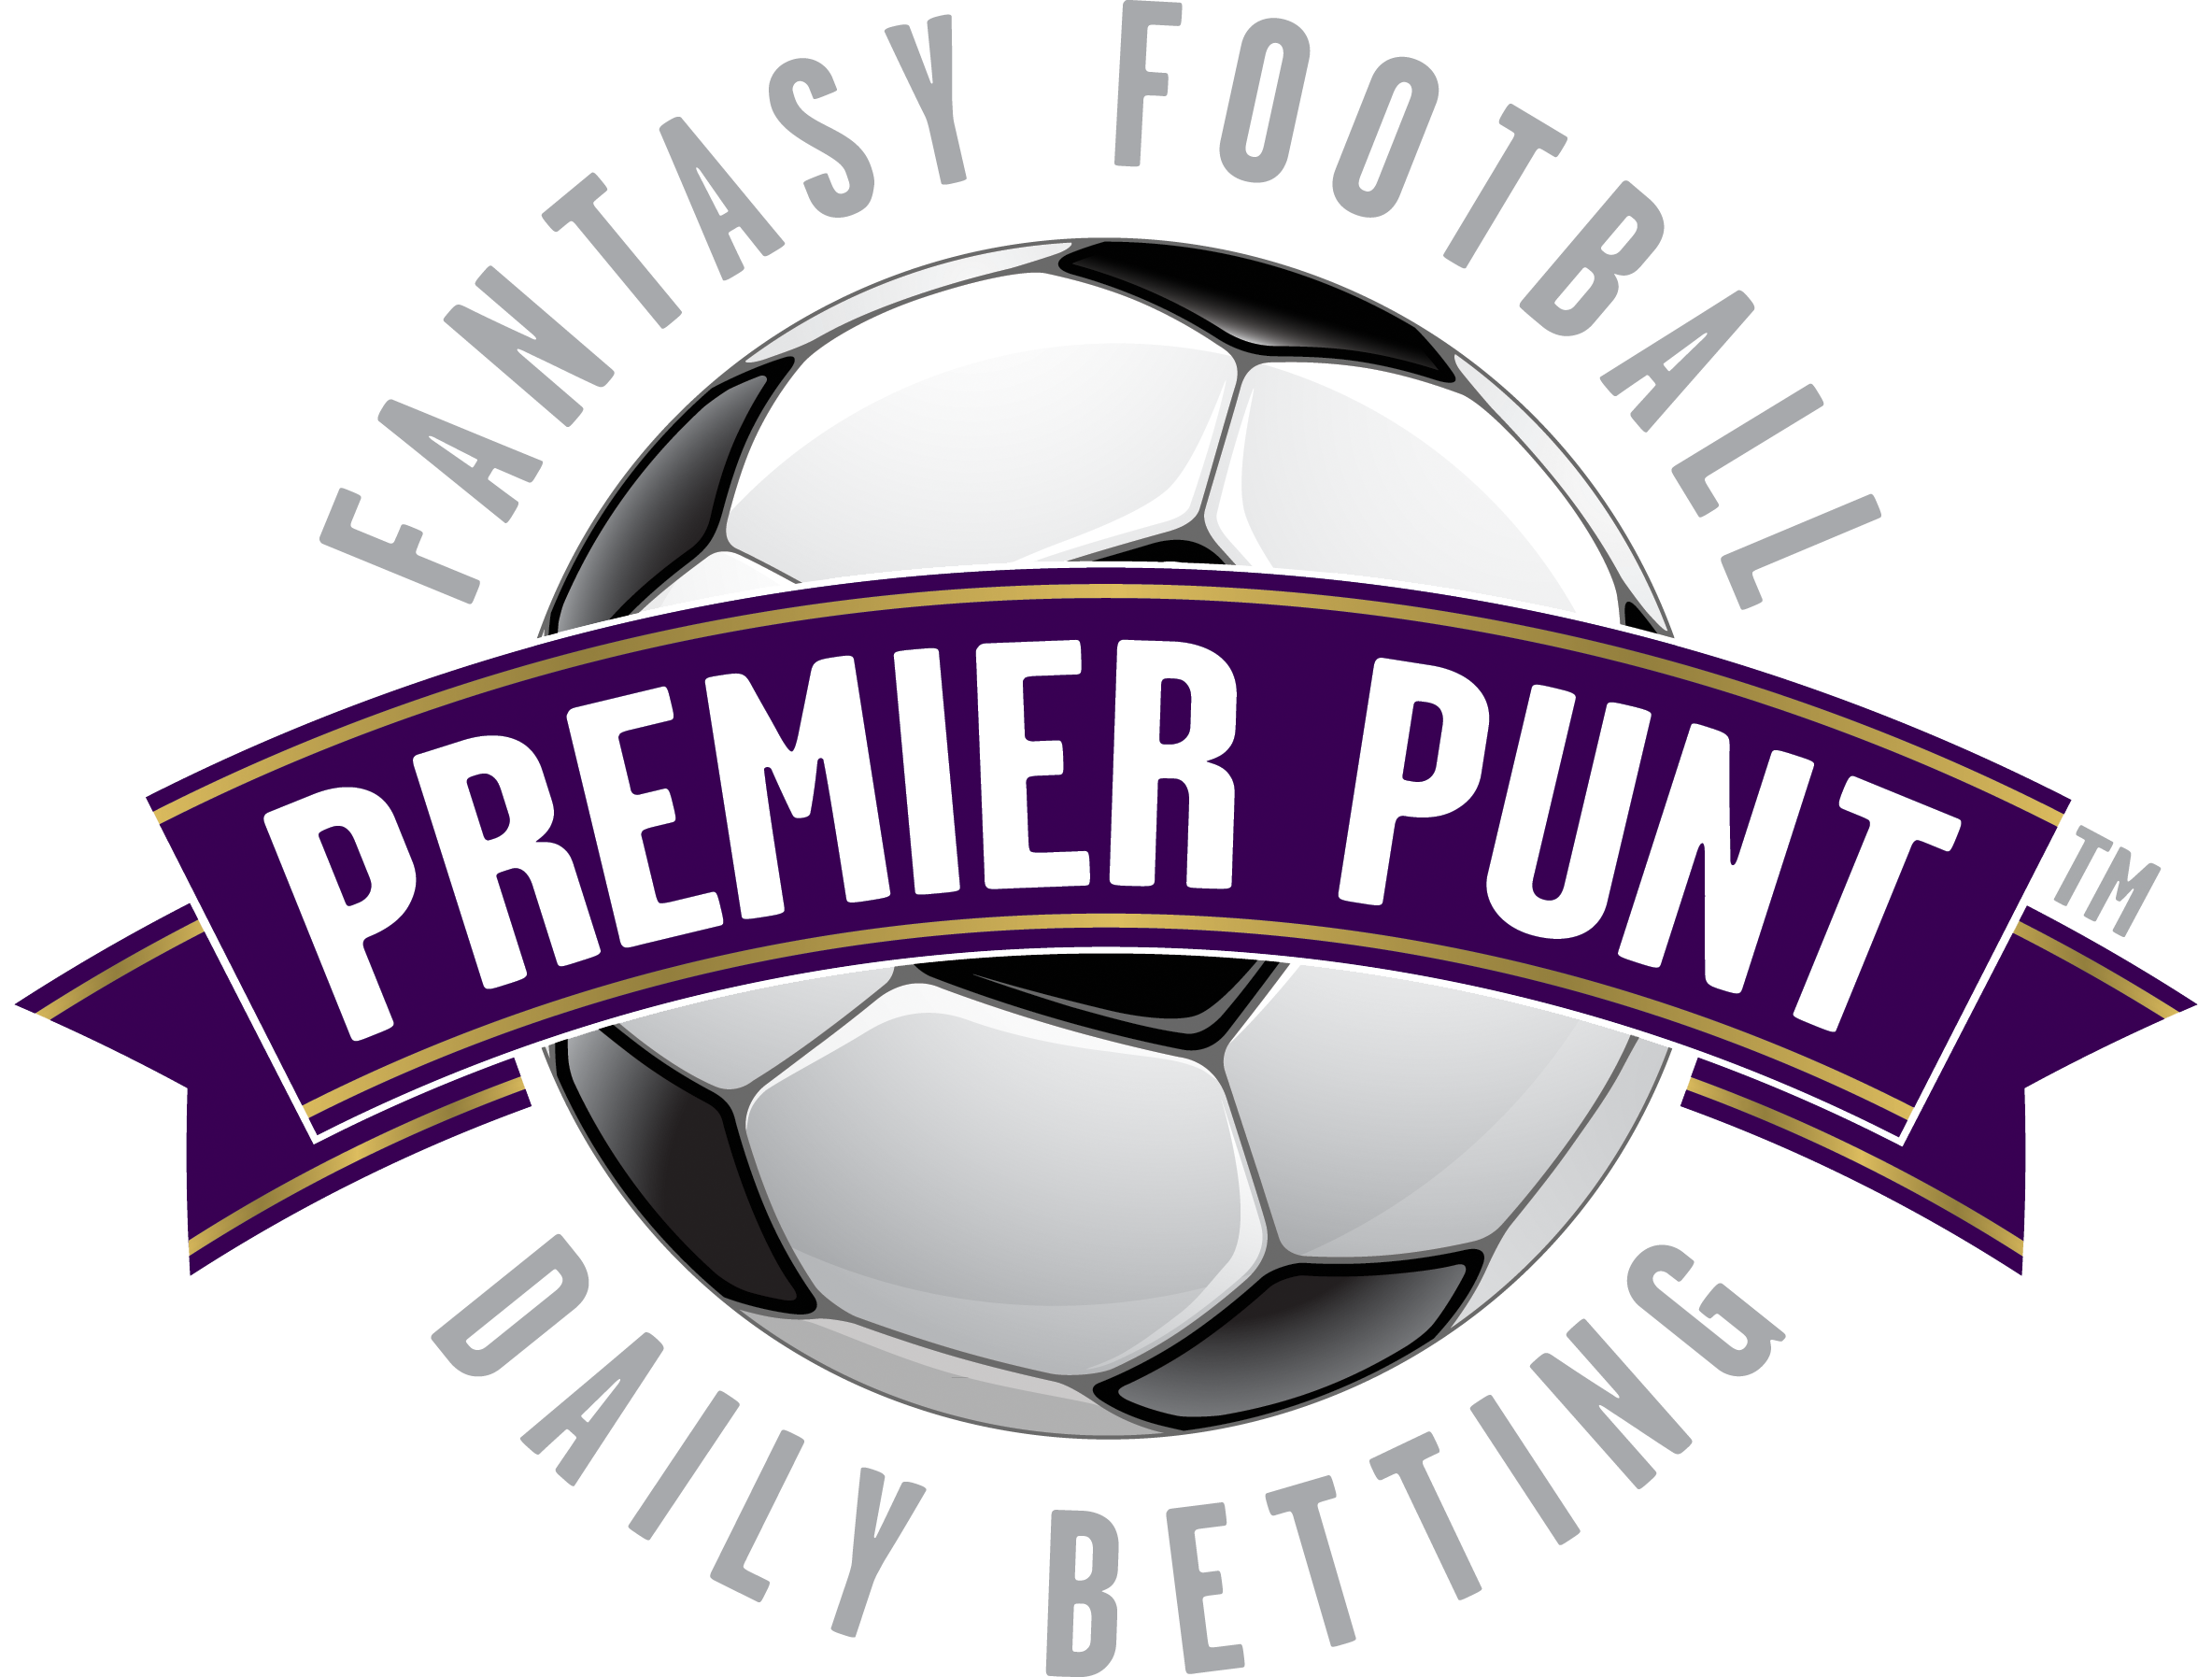 Have you picked your team on Premier Punt? 